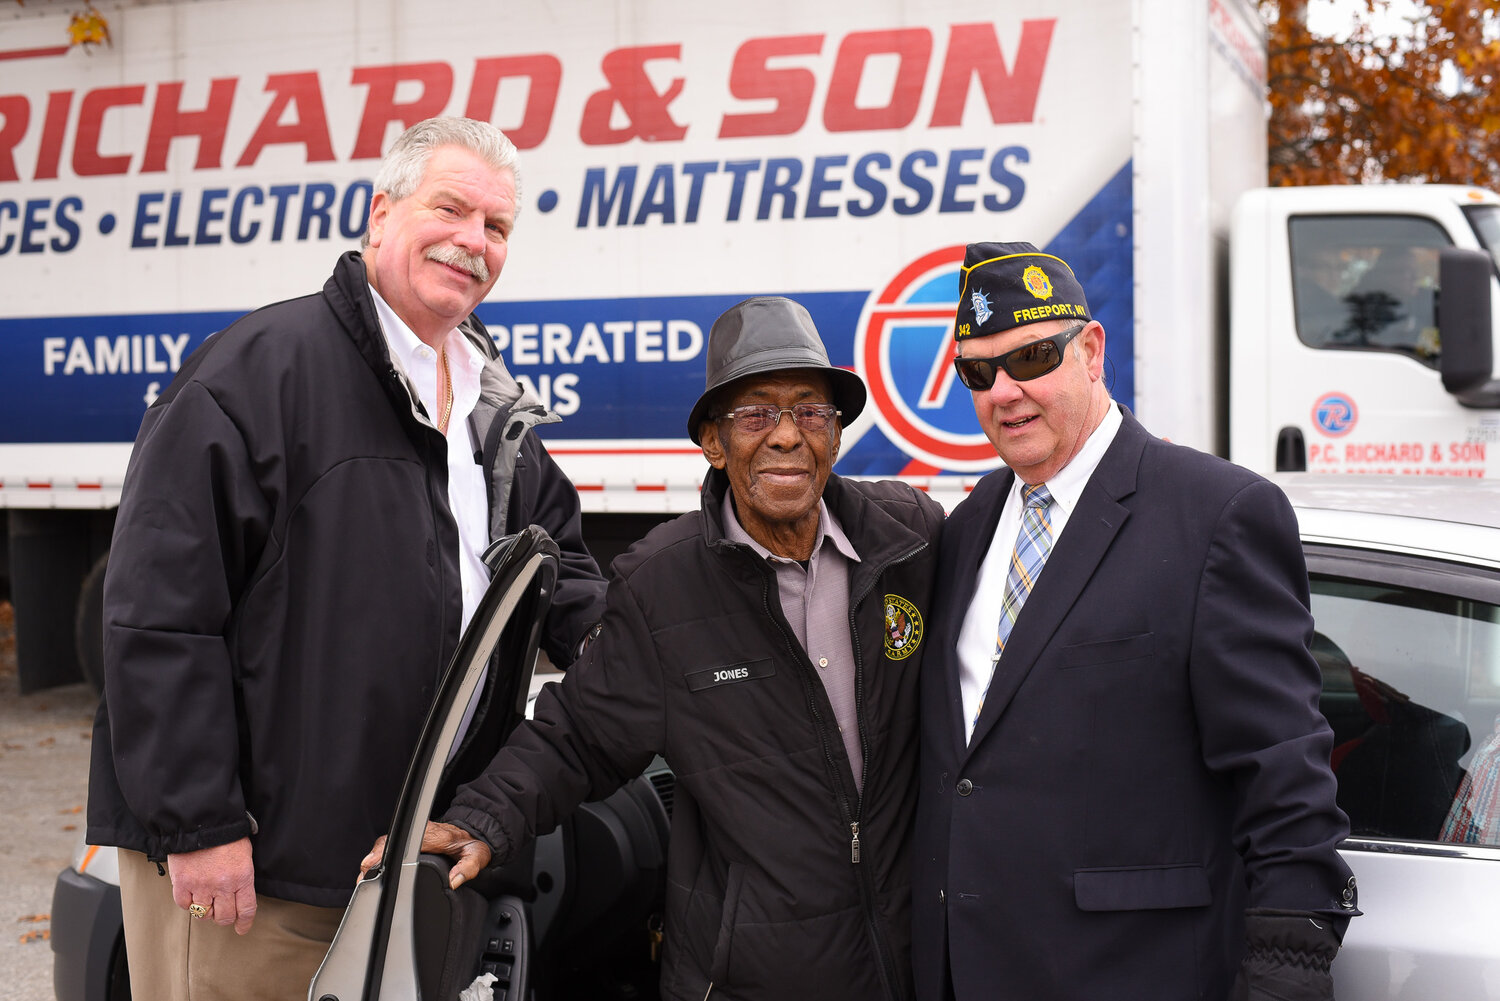 Freeport Fire Department executive director Ray Maguire, Korean War Veteran Curley Jones of Freeport and Mayor Robert Kennedy at the Stand Down event.